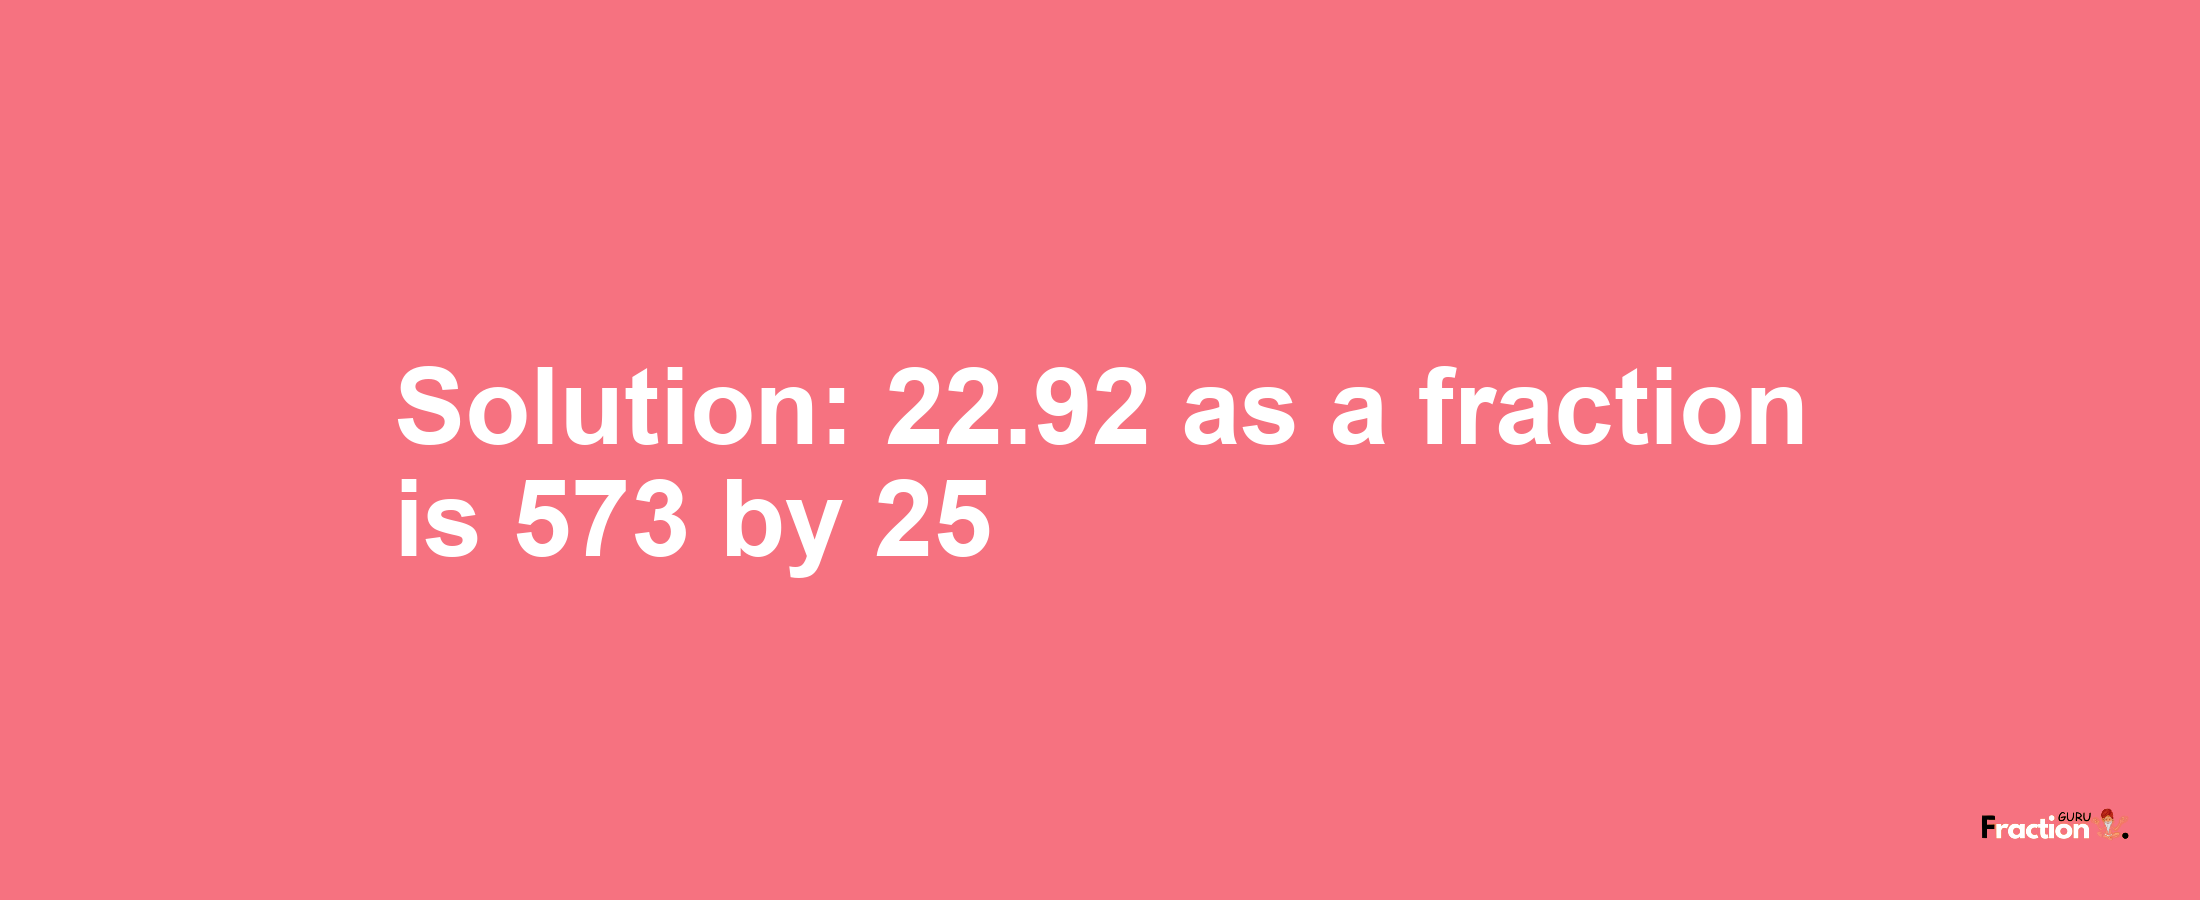 Solution:22.92 as a fraction is 573/25